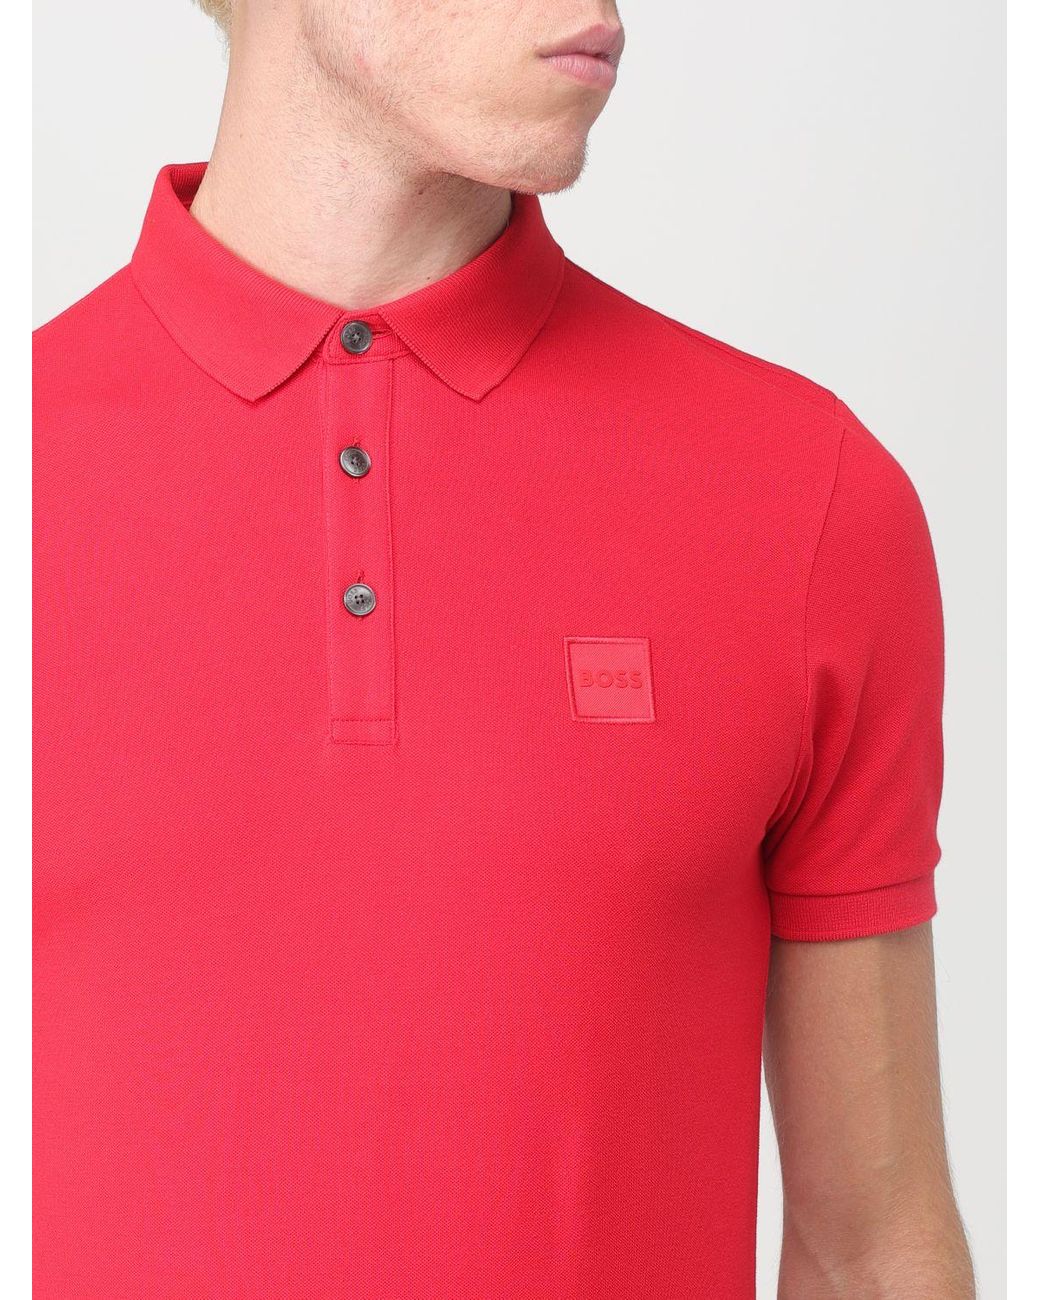 BOSS by HUGO BOSS Polo Shirt in Red for Men | Lyst Canada